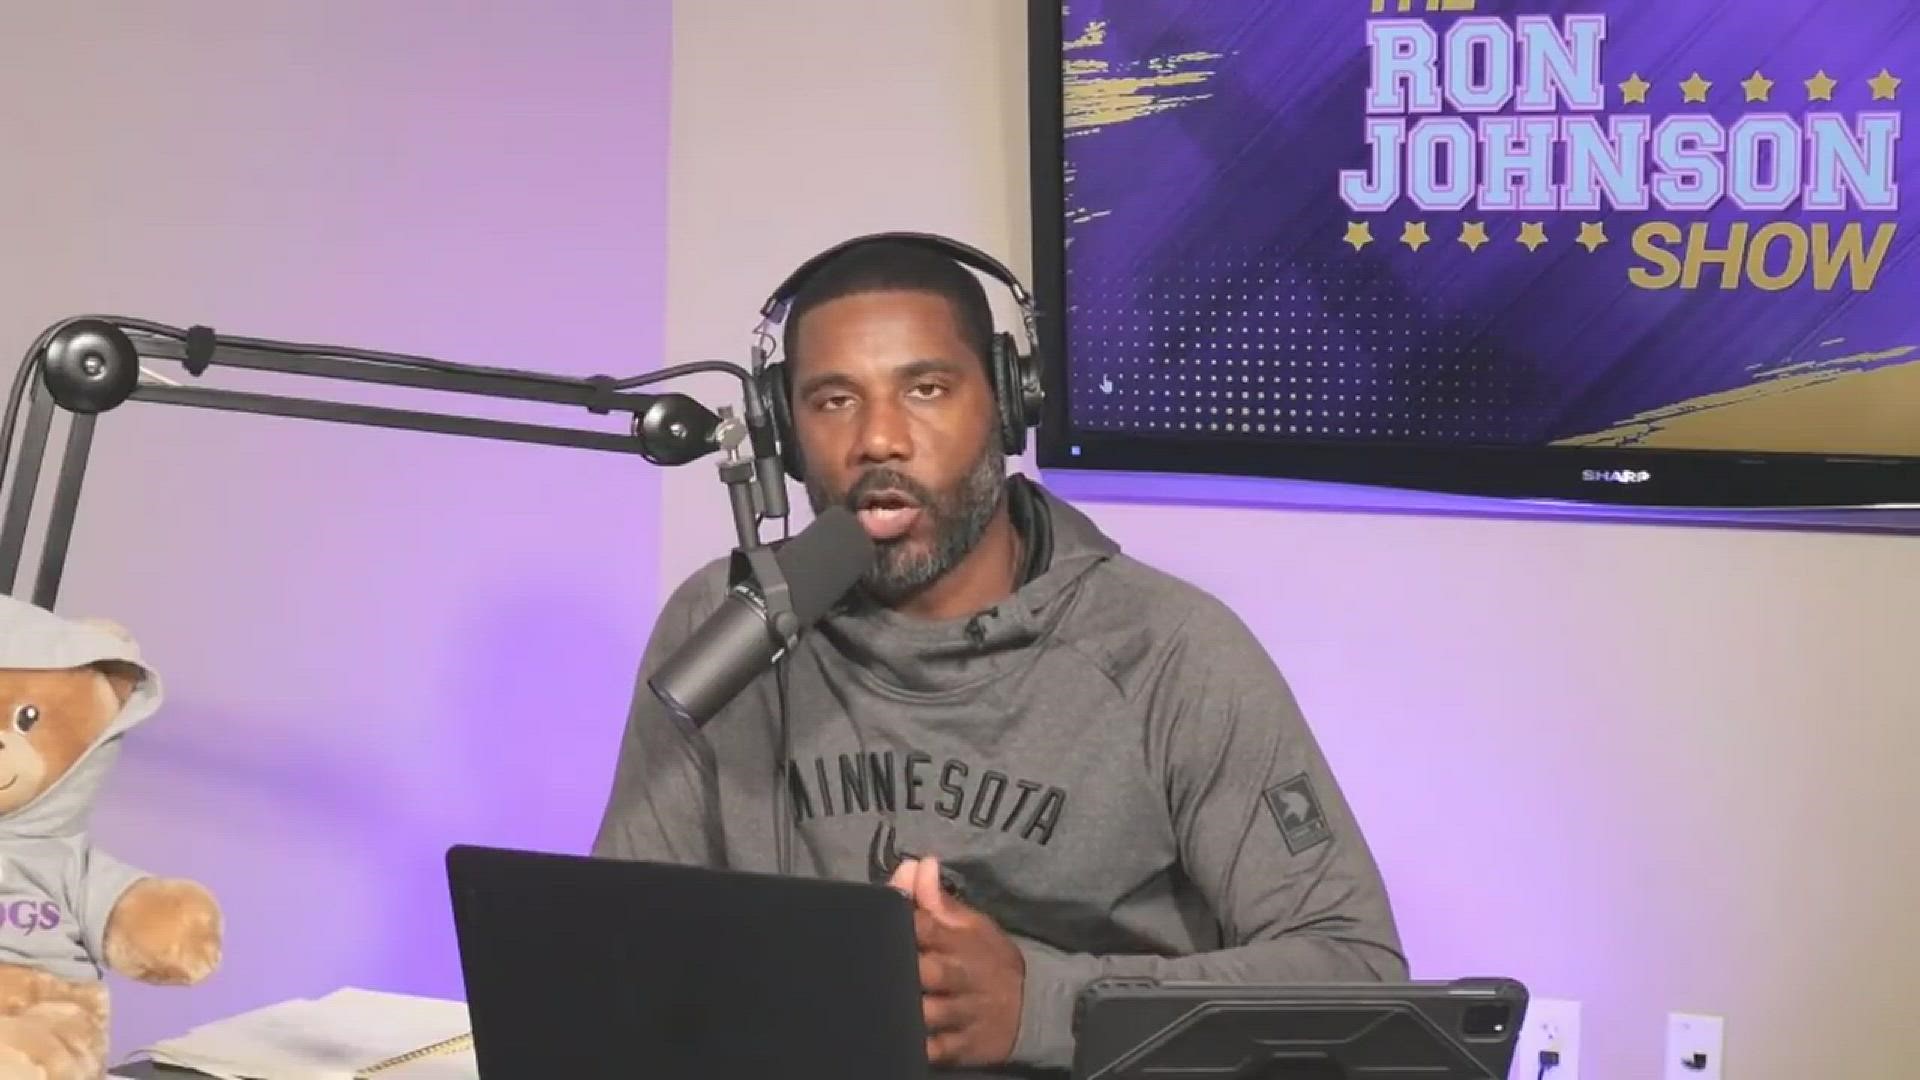 Former NFL S Ryan Clark knows a thing or two about defensive backs. Ron Johnson asks the former Super Bowl champ about the Vikings first-round pick Lewis Cine.